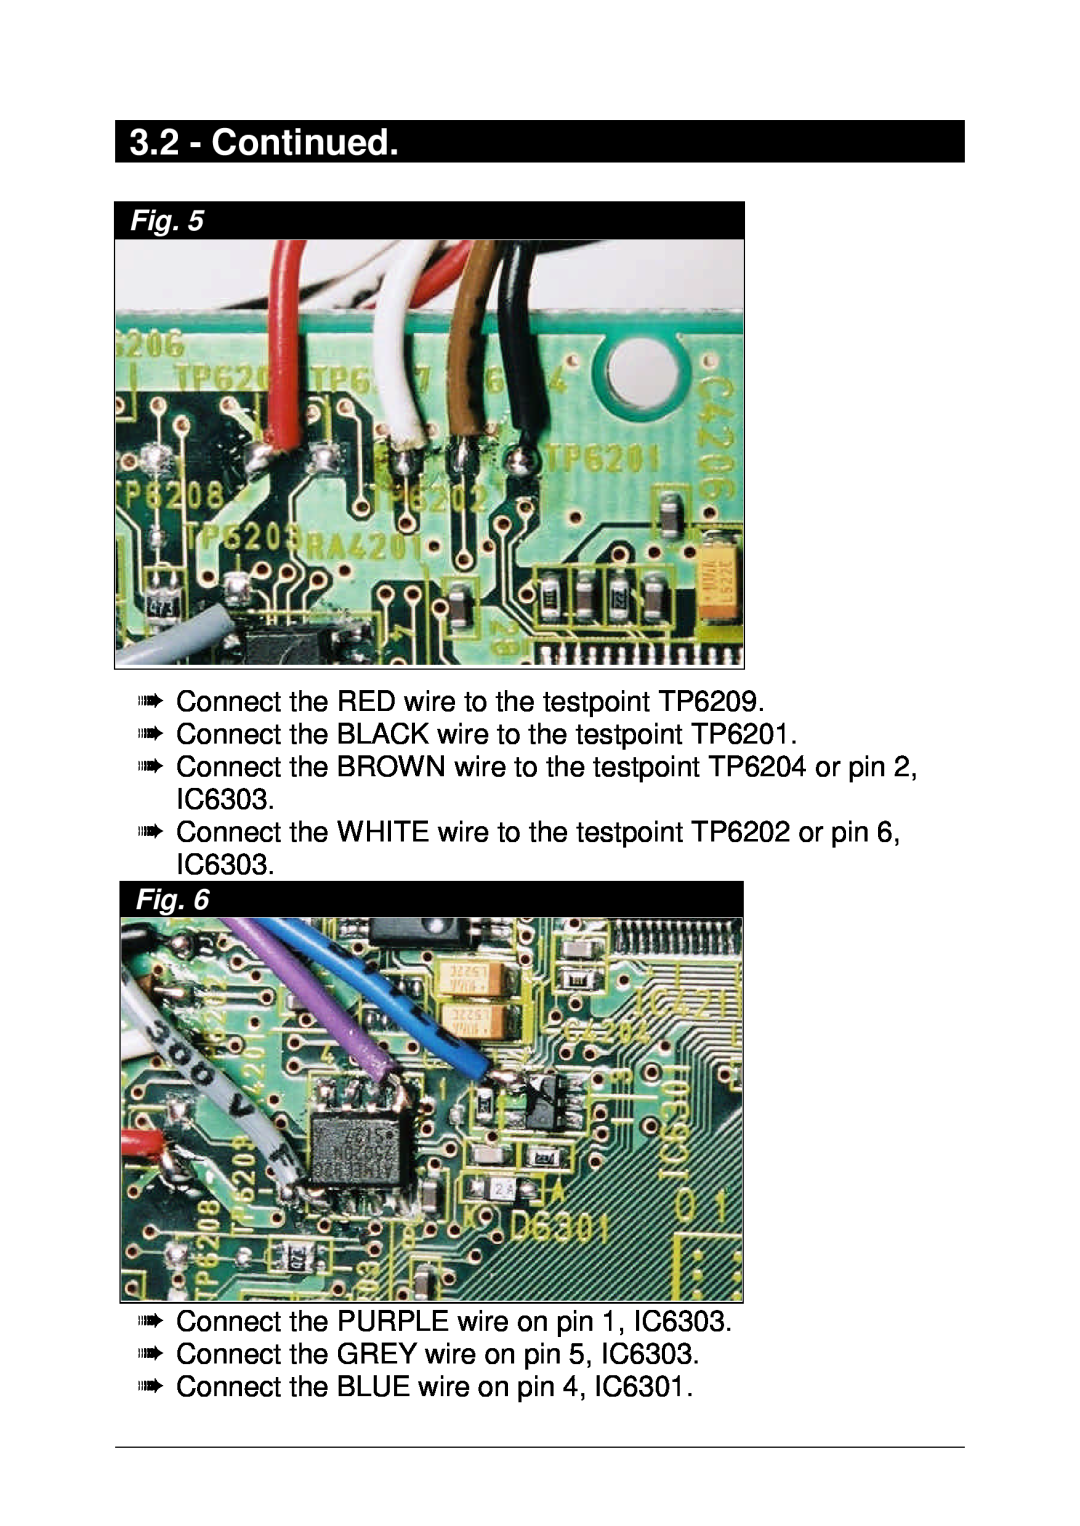 Panasonic 98RV1 Continued, à Connect the RED wire to the testpoint TP6209, à Connect the PURPLE wire on pin 1, IC6303 